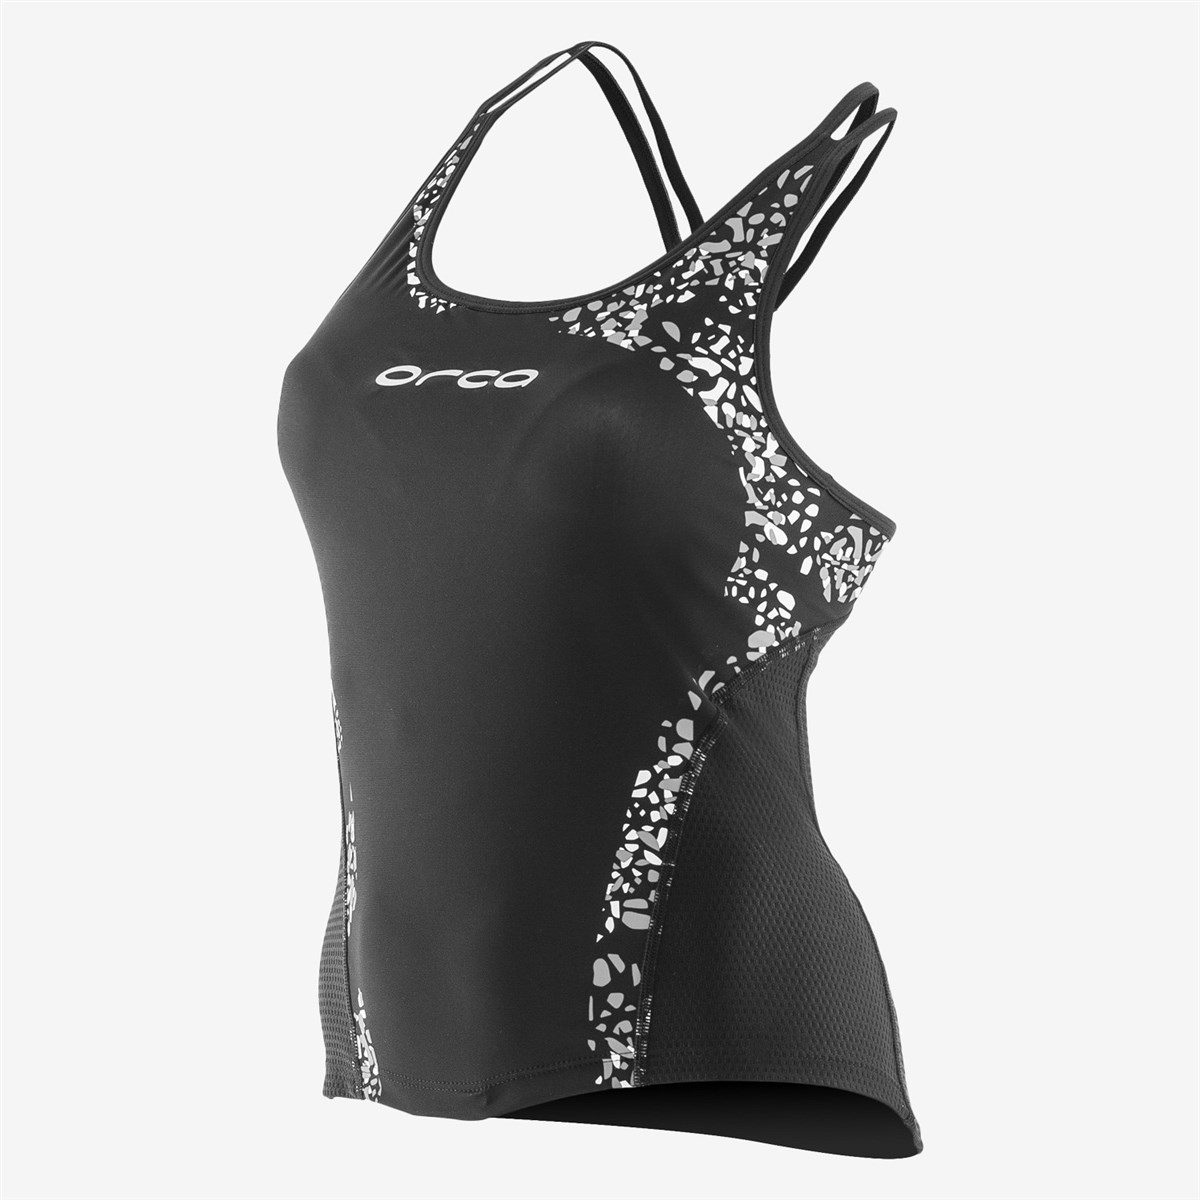 Orca 226 Womens Tri Singlet product image